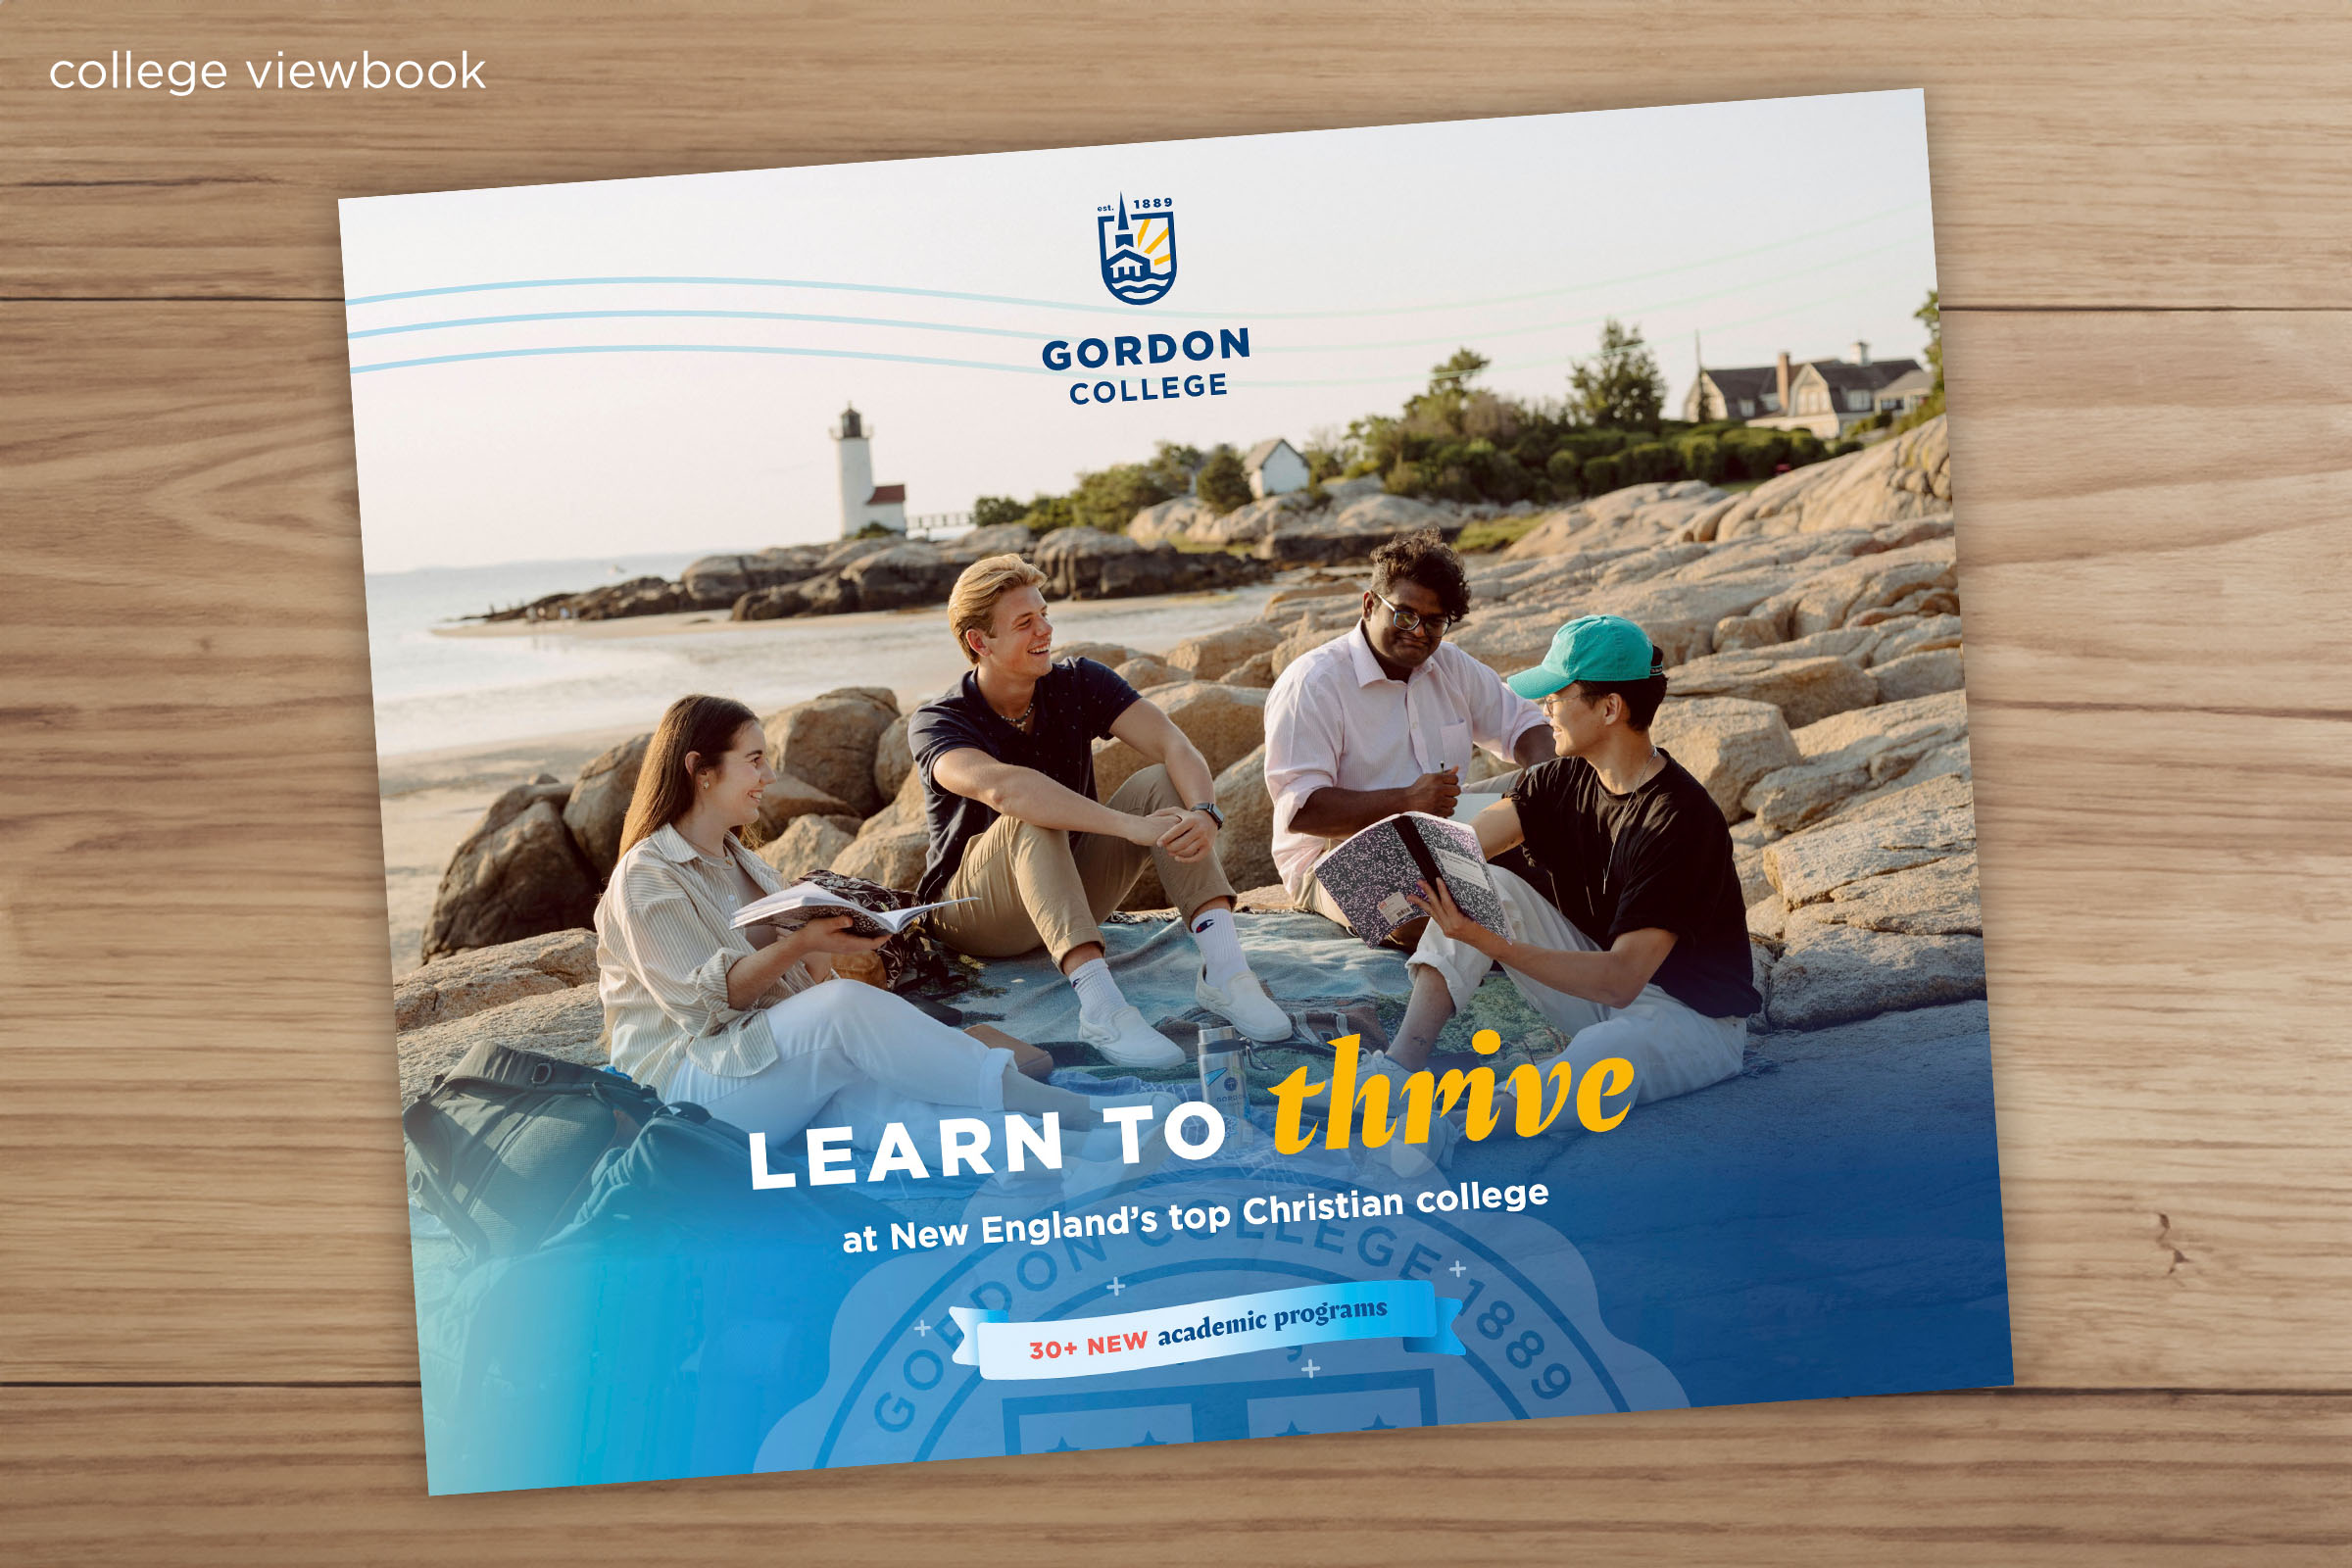 The cover of the college viewbook